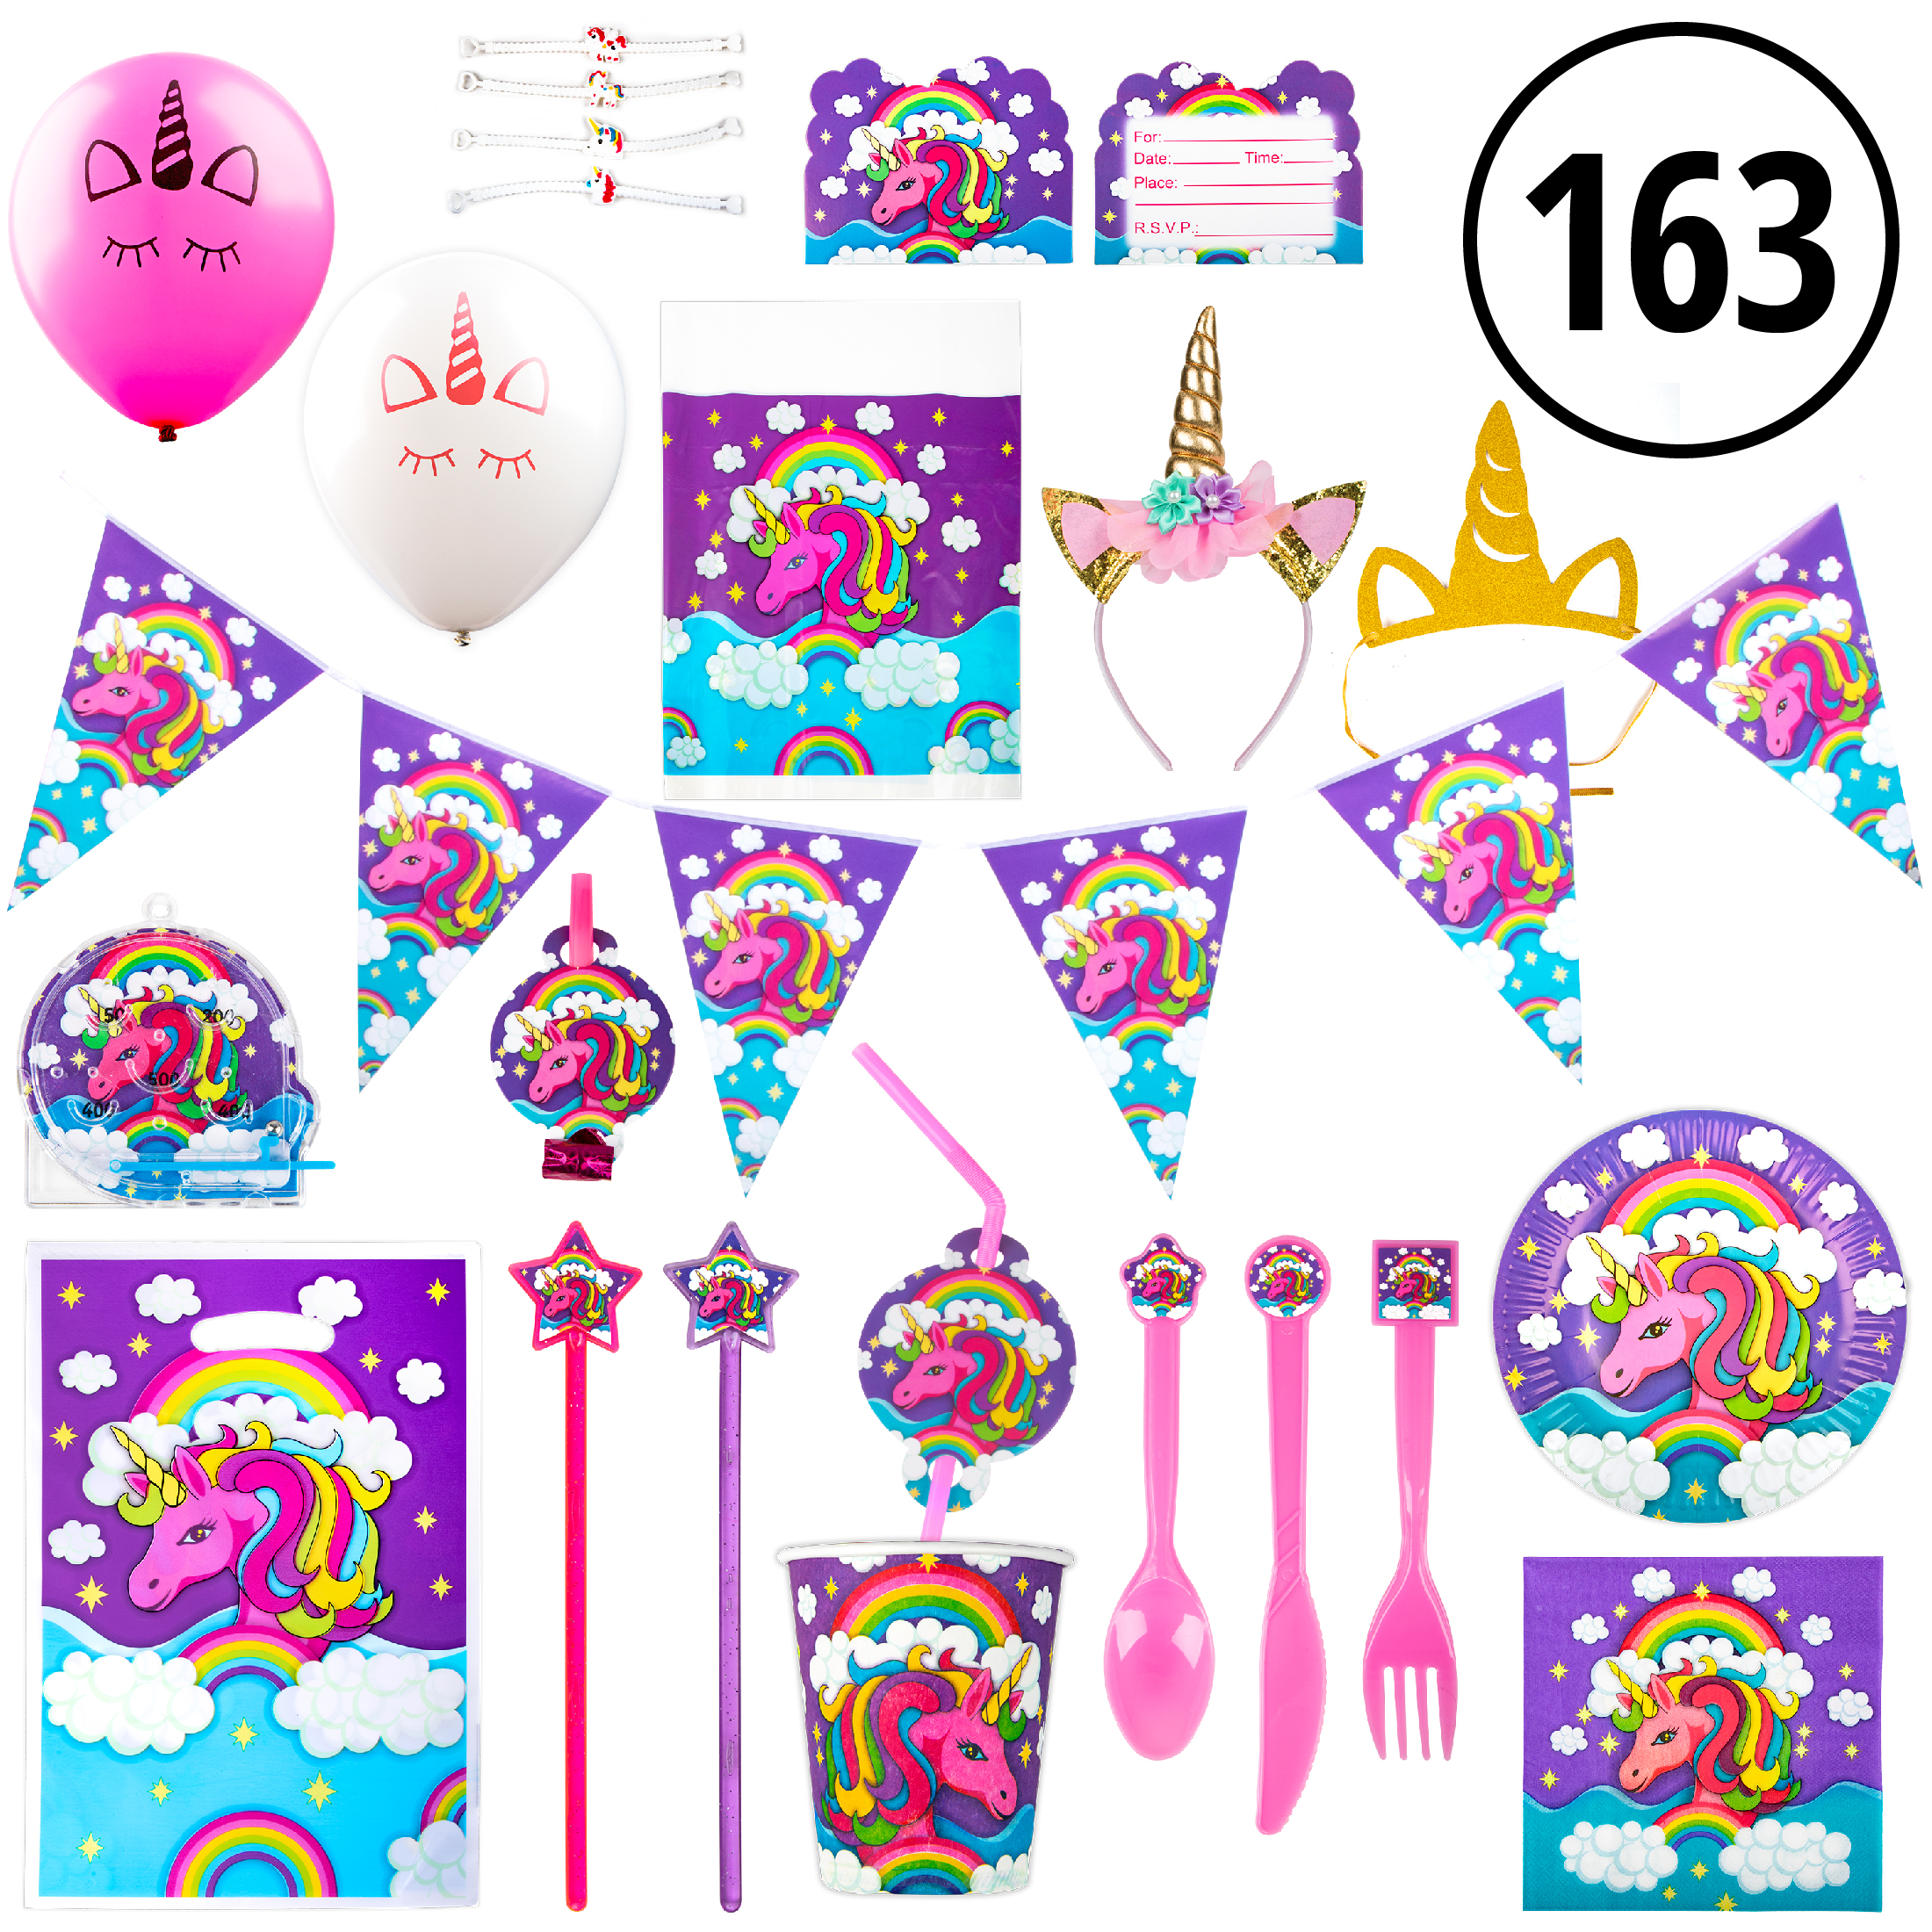 USA Toyz Rainbow Unicorn Party Supplies - 163 Unicorn Party Decorations and Party Favors for Girls and Boys